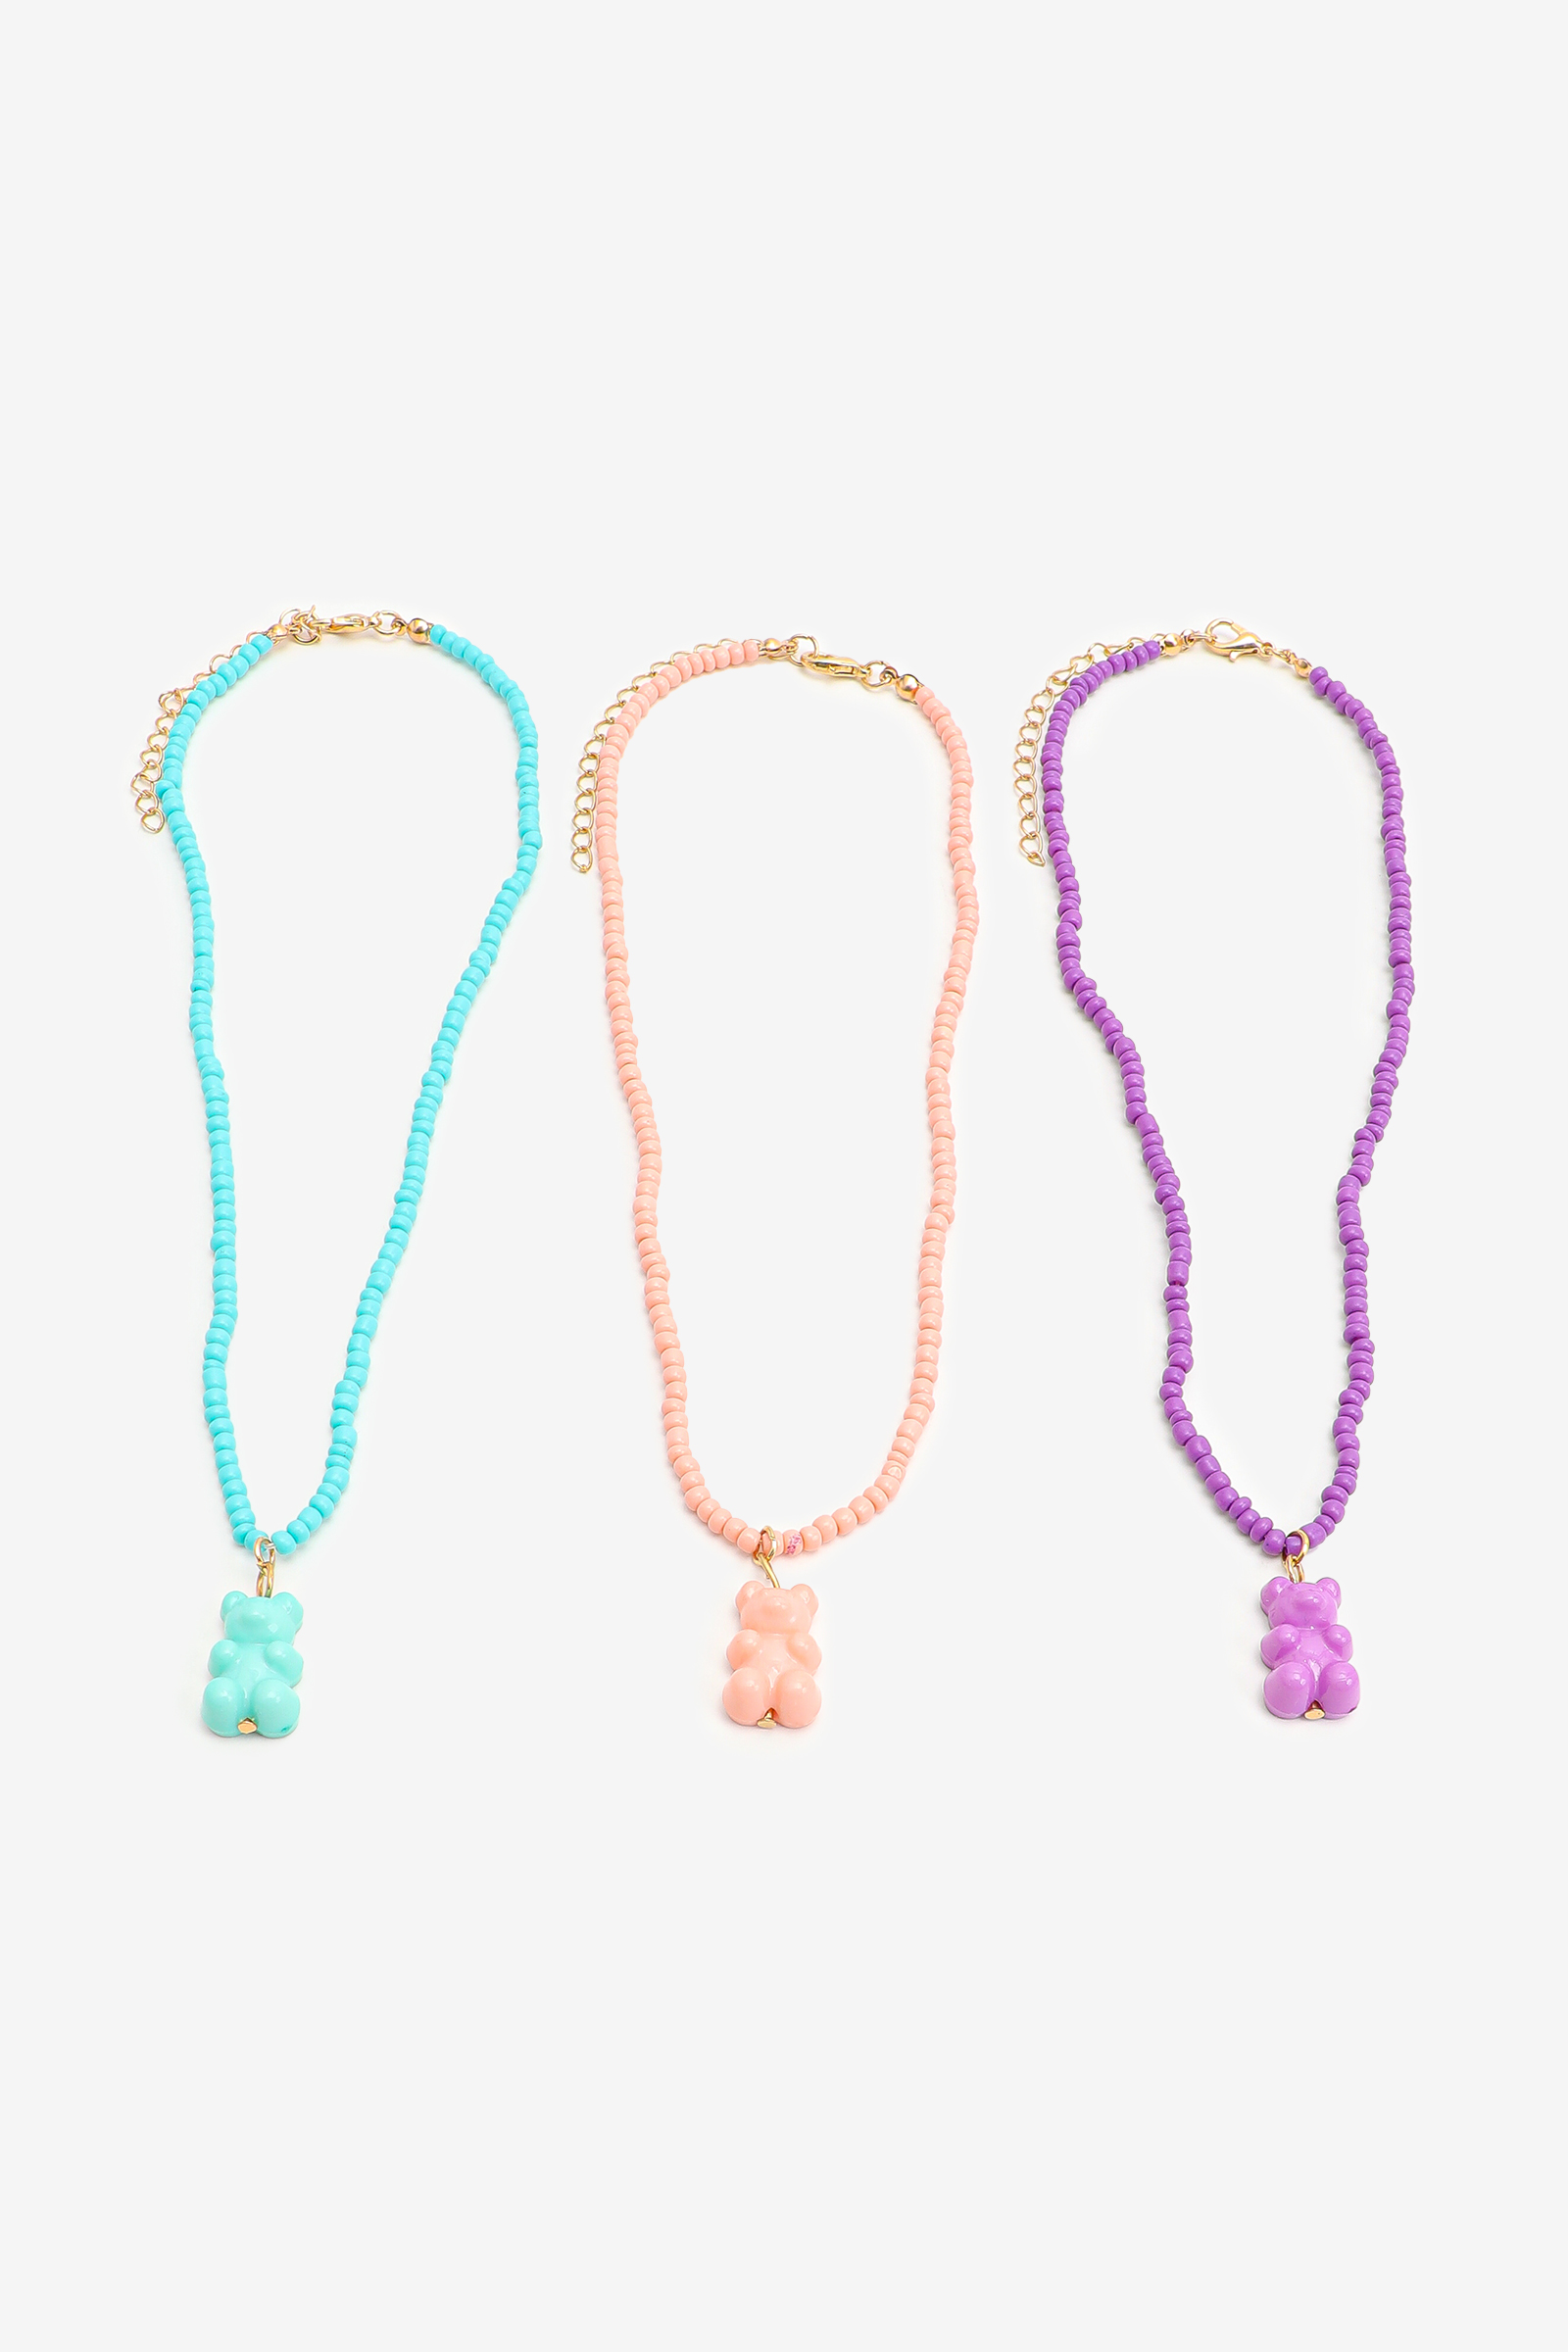 Bear Charm Beaded Necklaces for Girls